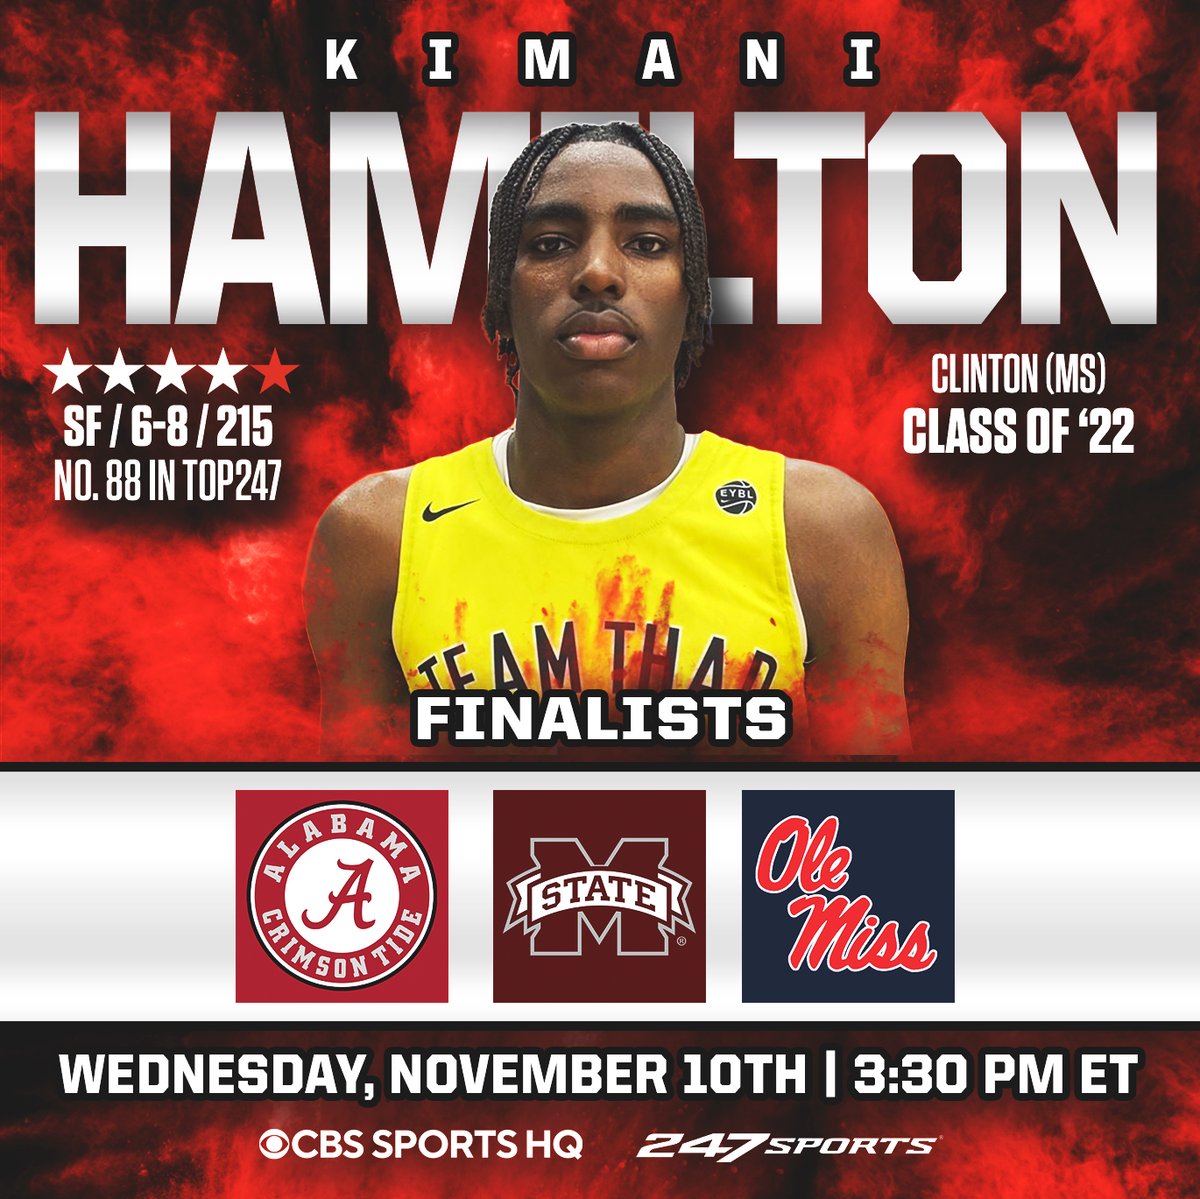 Kimani Hamilton, the No. 88 overall prospect in the 2022 class, broke down his three finalists ahead of his decision. Find out where the four-star will be headed on Wednesday, November 10th at 3:30 PM ET on @CBSSportsHQ. || Story: 247sports.com/Article/Kimani…